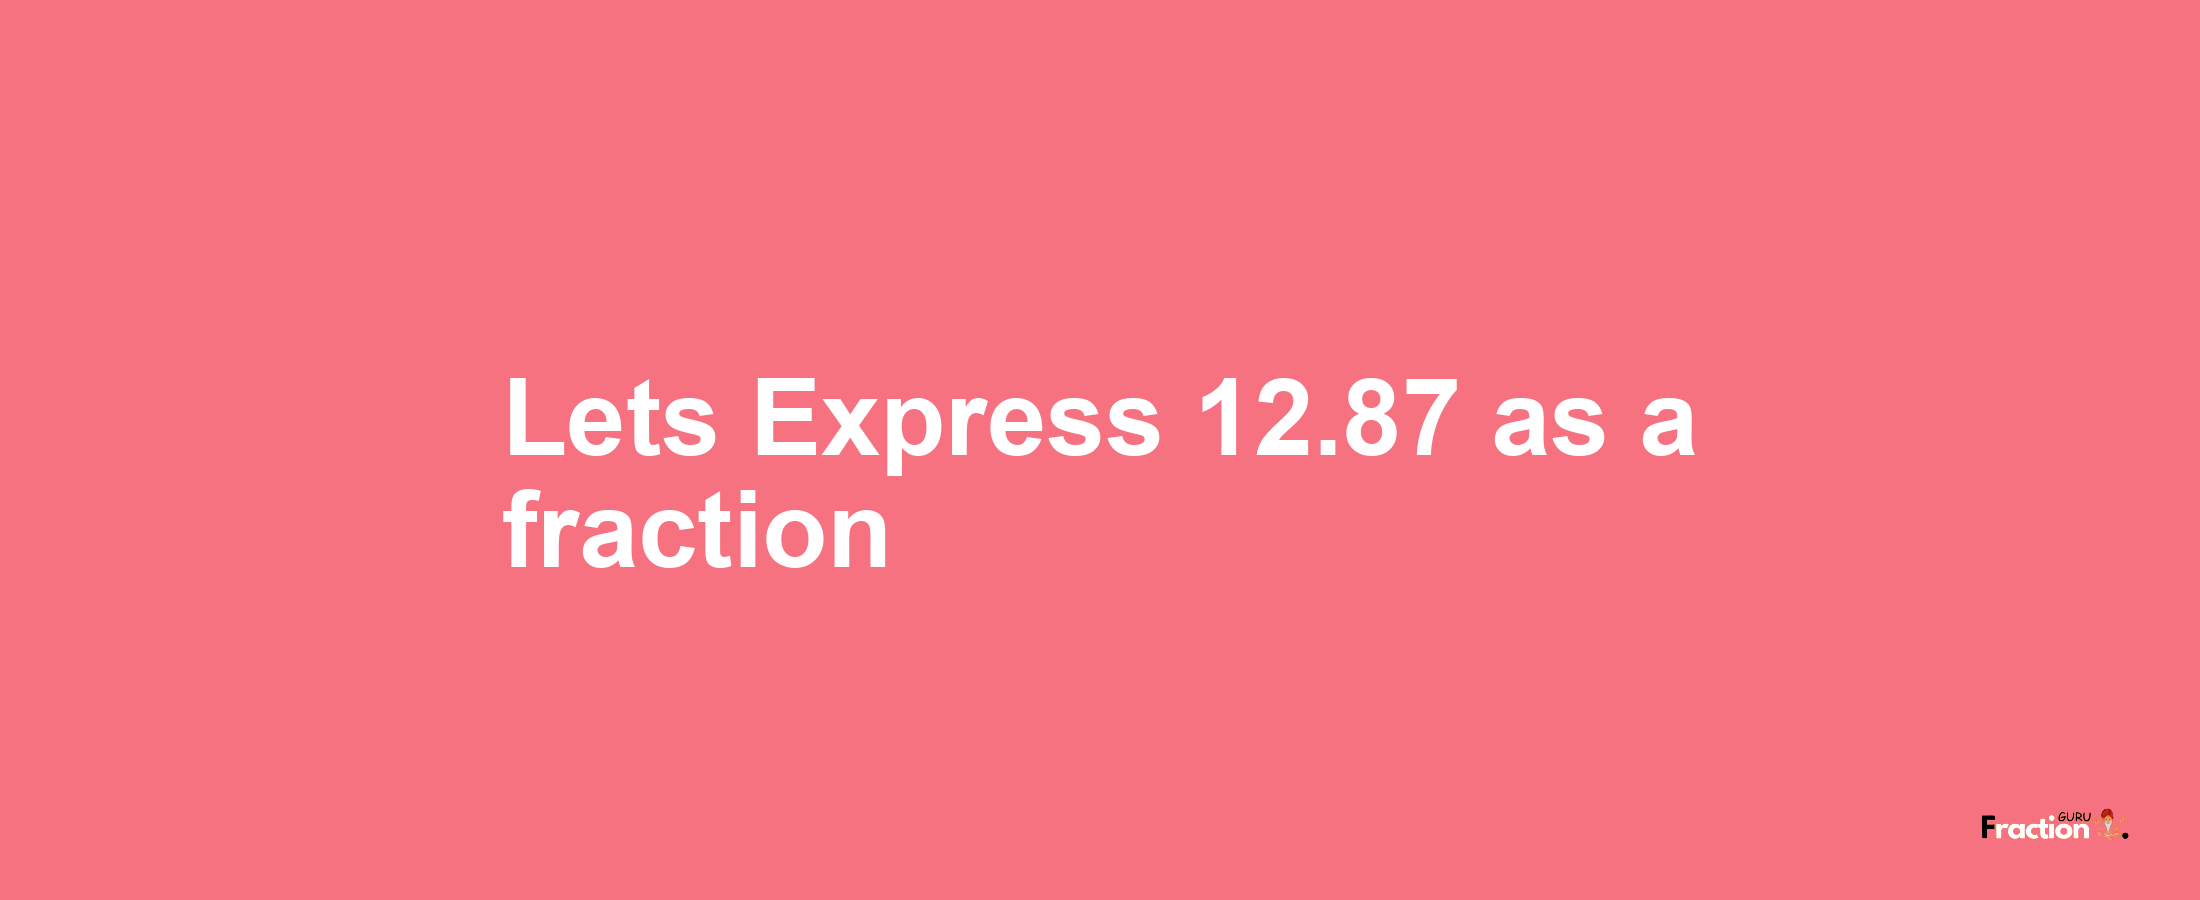 Lets Express 12.87 as afraction